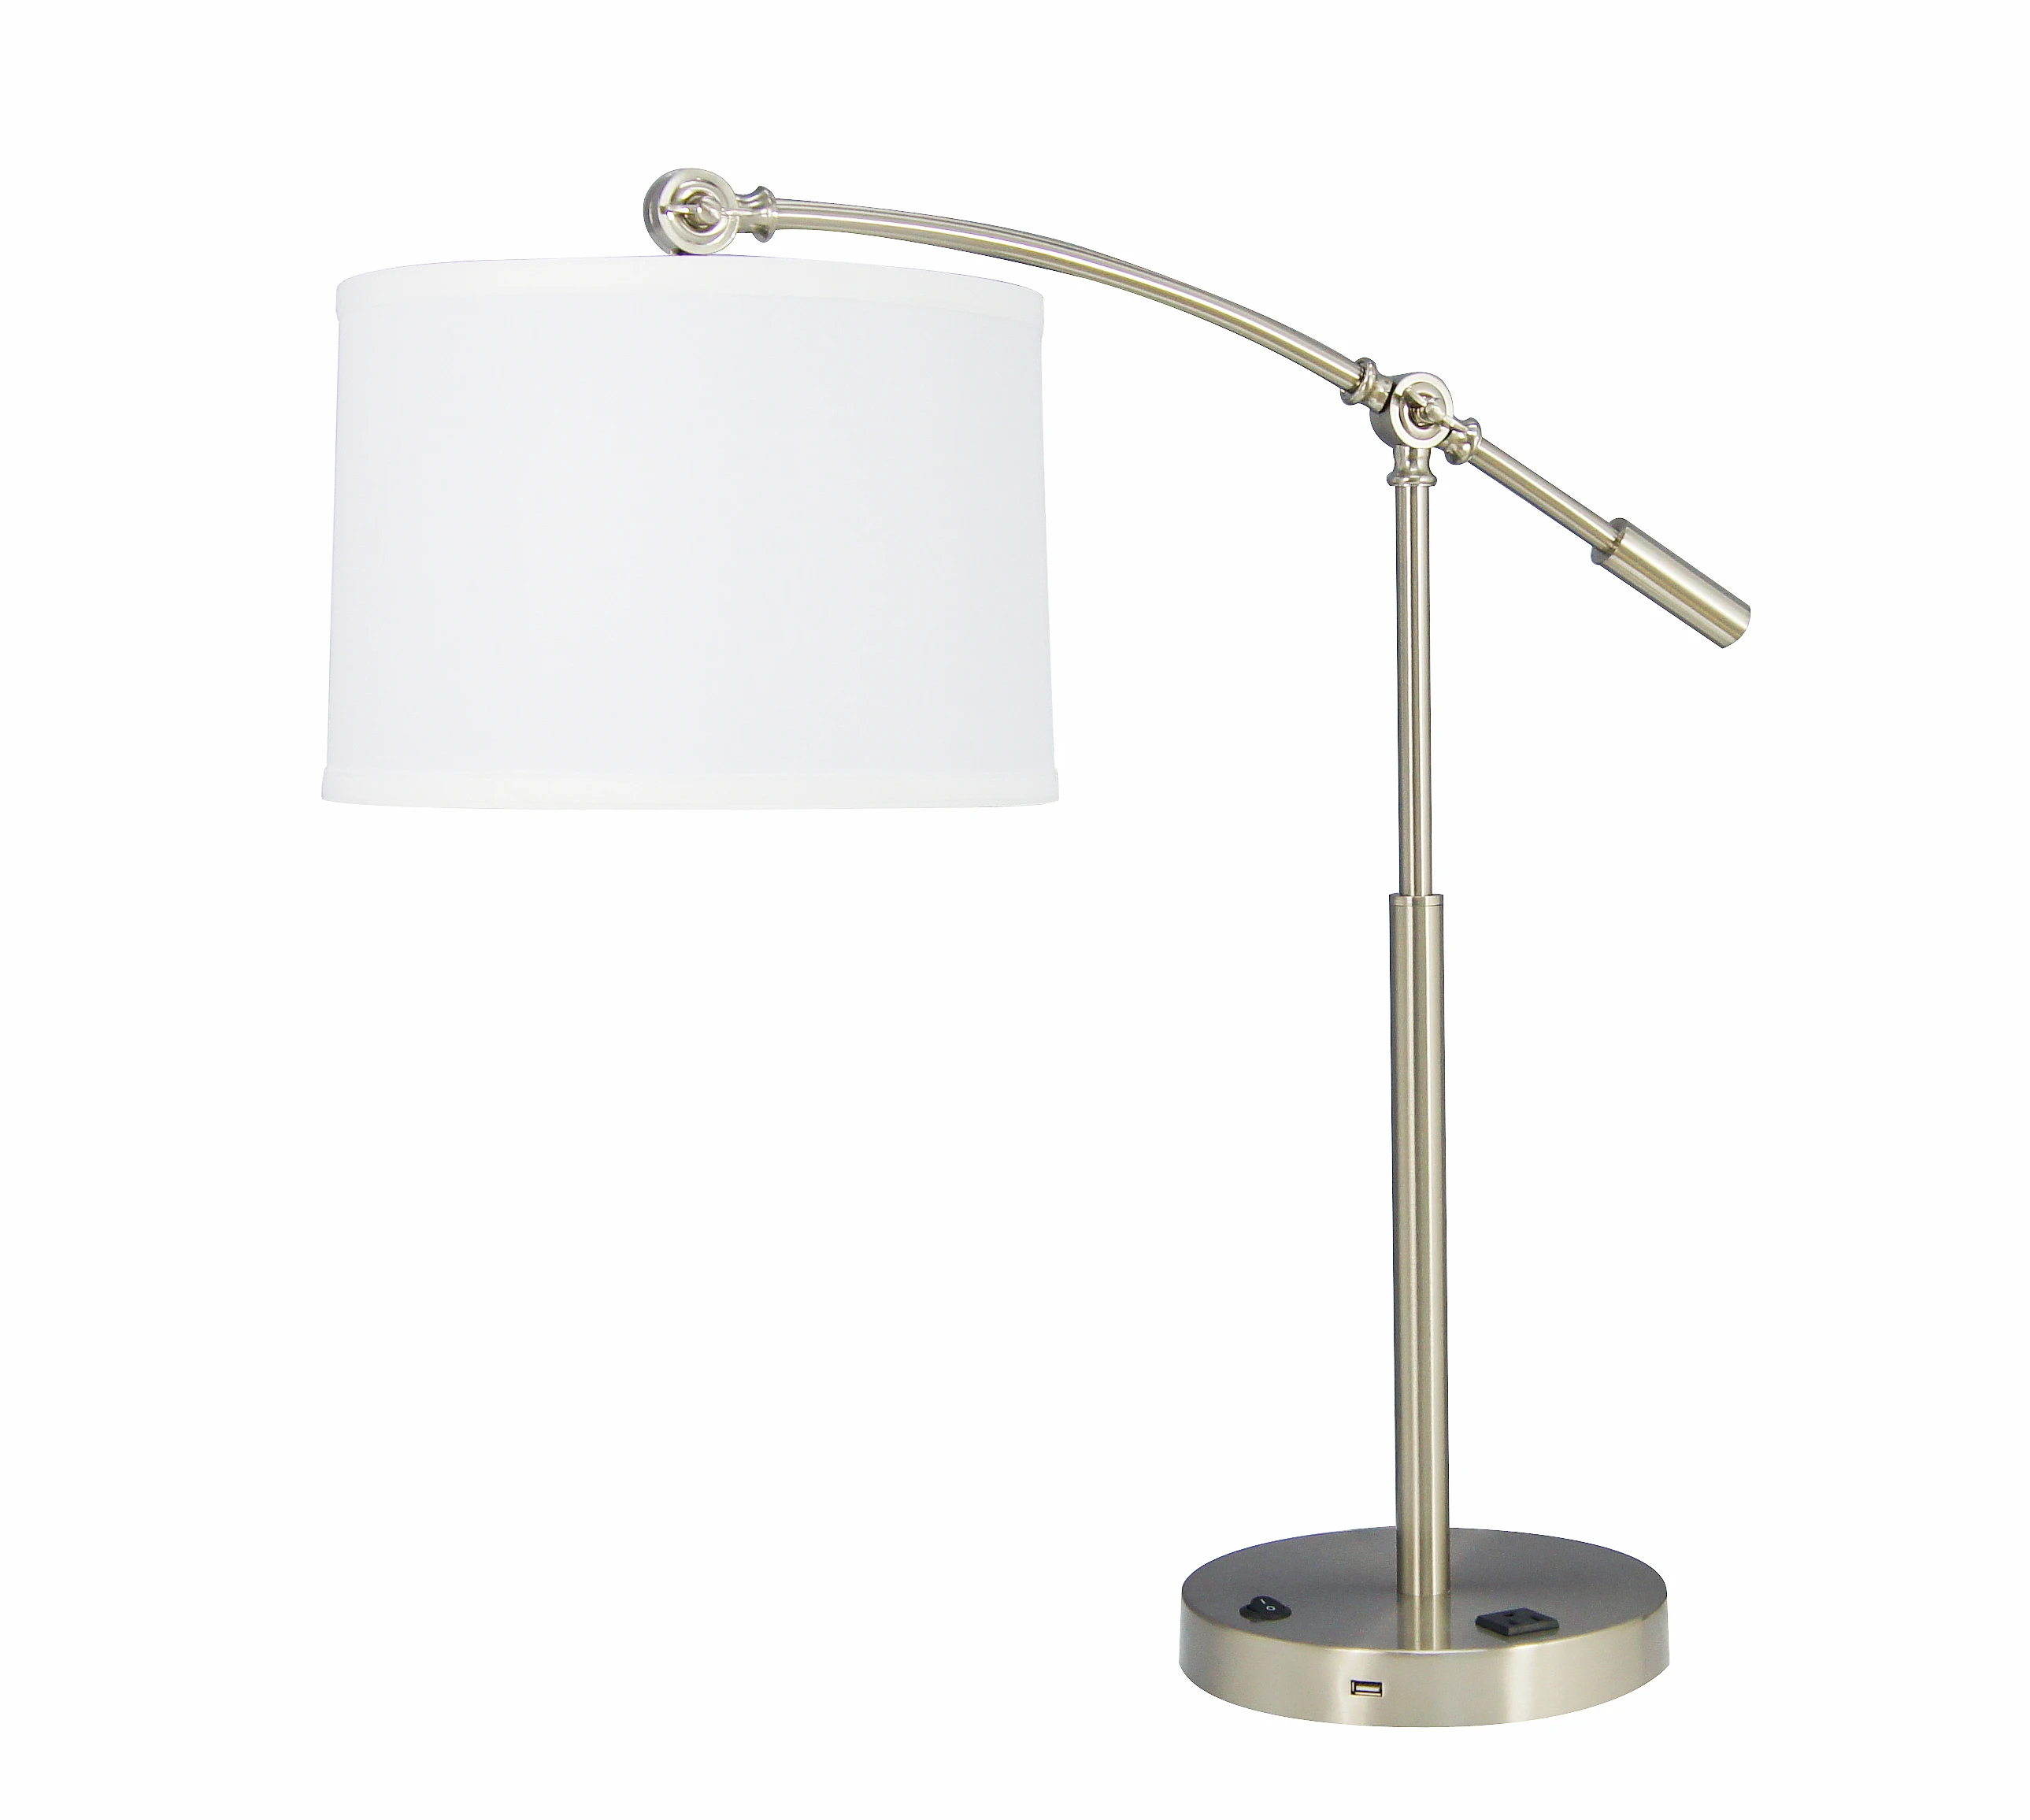 Modern Iron Bedside Lamp Adjustable Arc Hotel Table Lamp with White Round Fabric Shade and USB